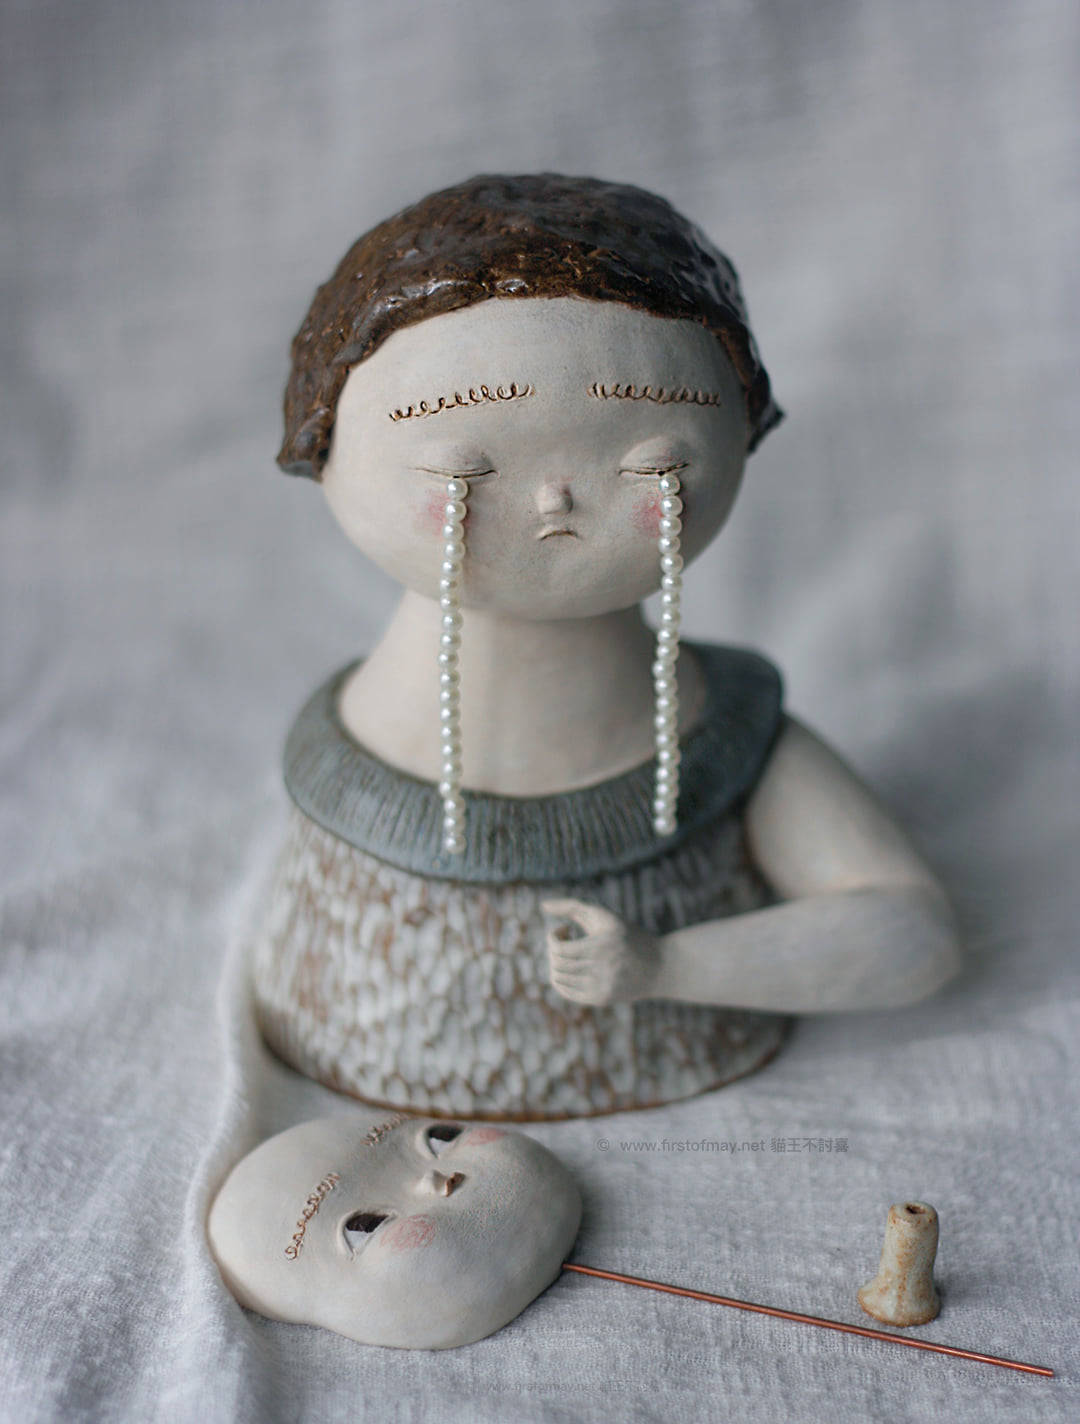 Delicate Ceramic Sculptures Of Figures Crying Pearls By First Of May Studio (14)